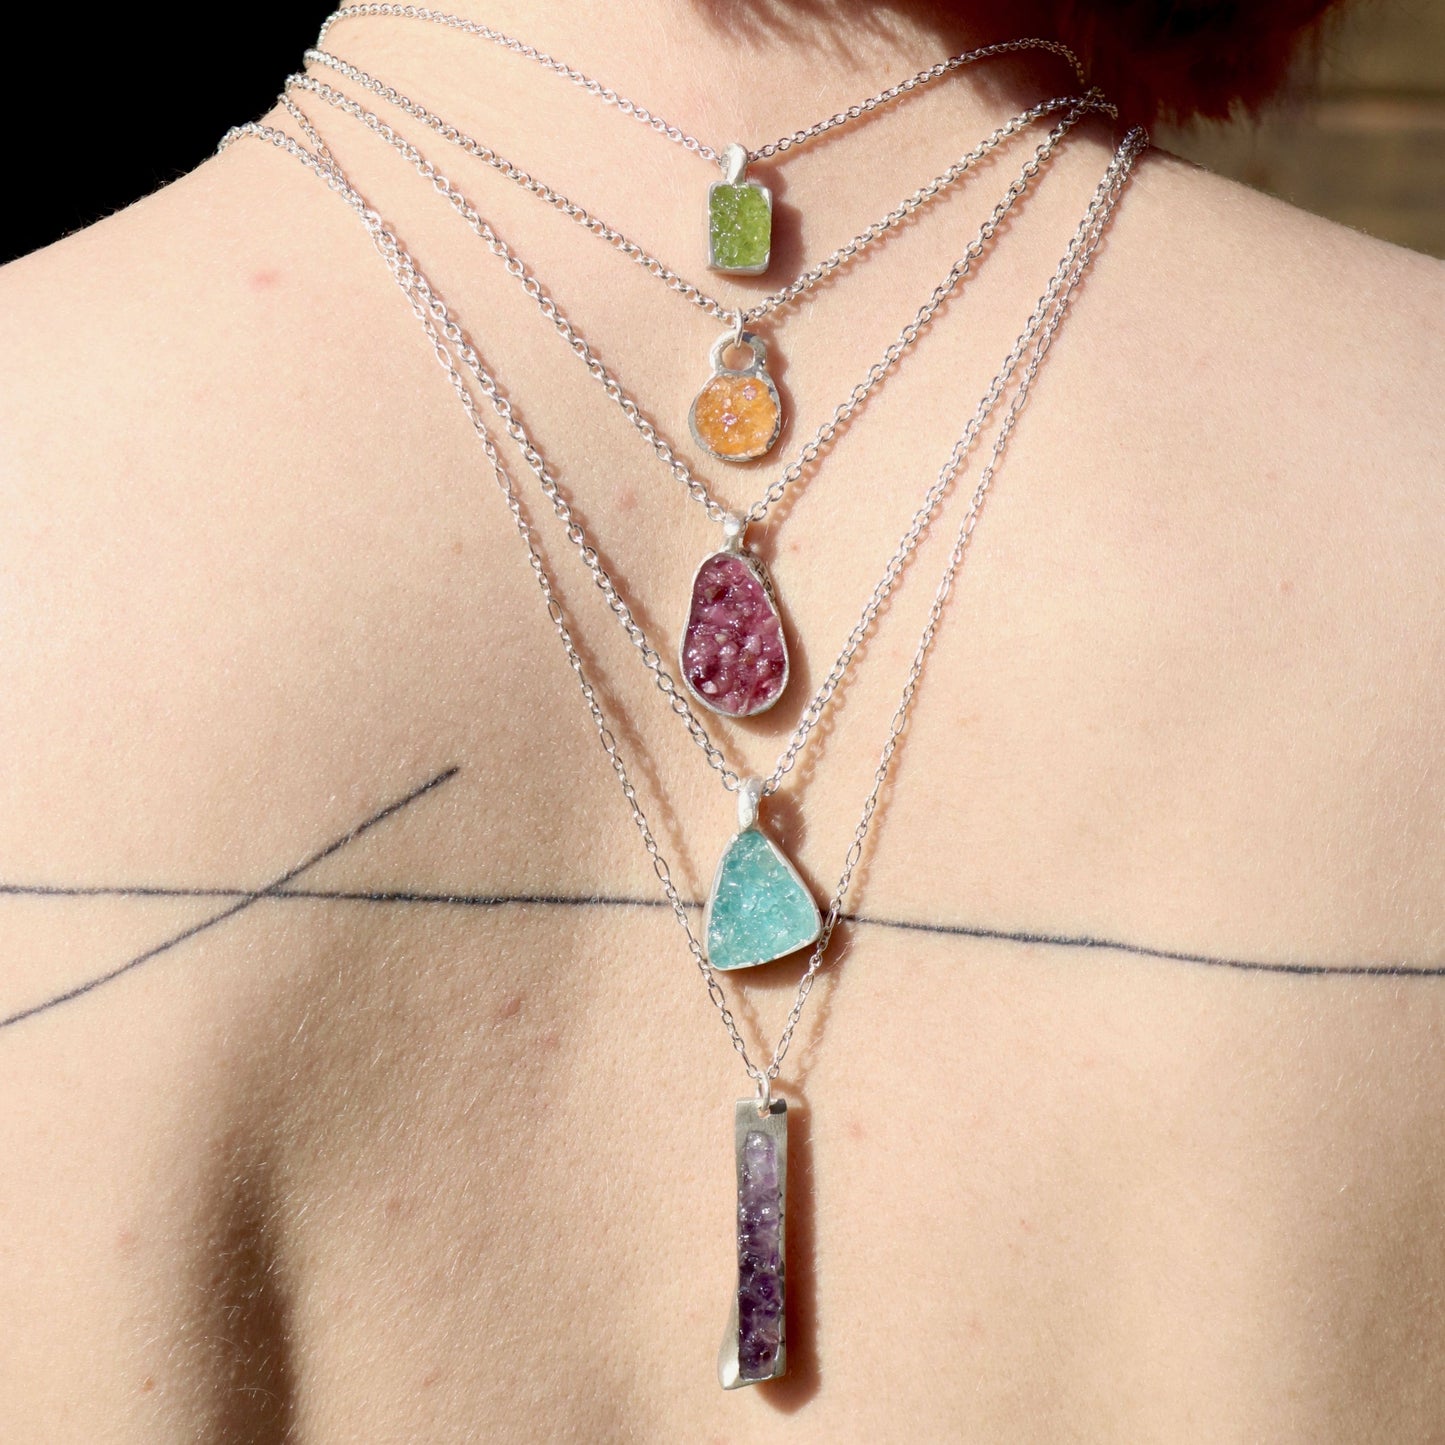 Gemstone pendants. Made in Wanaka. Unique, colourful jewellery designed and crafted by New Zealand artist and jeweller Briar Hardy-Hesson.